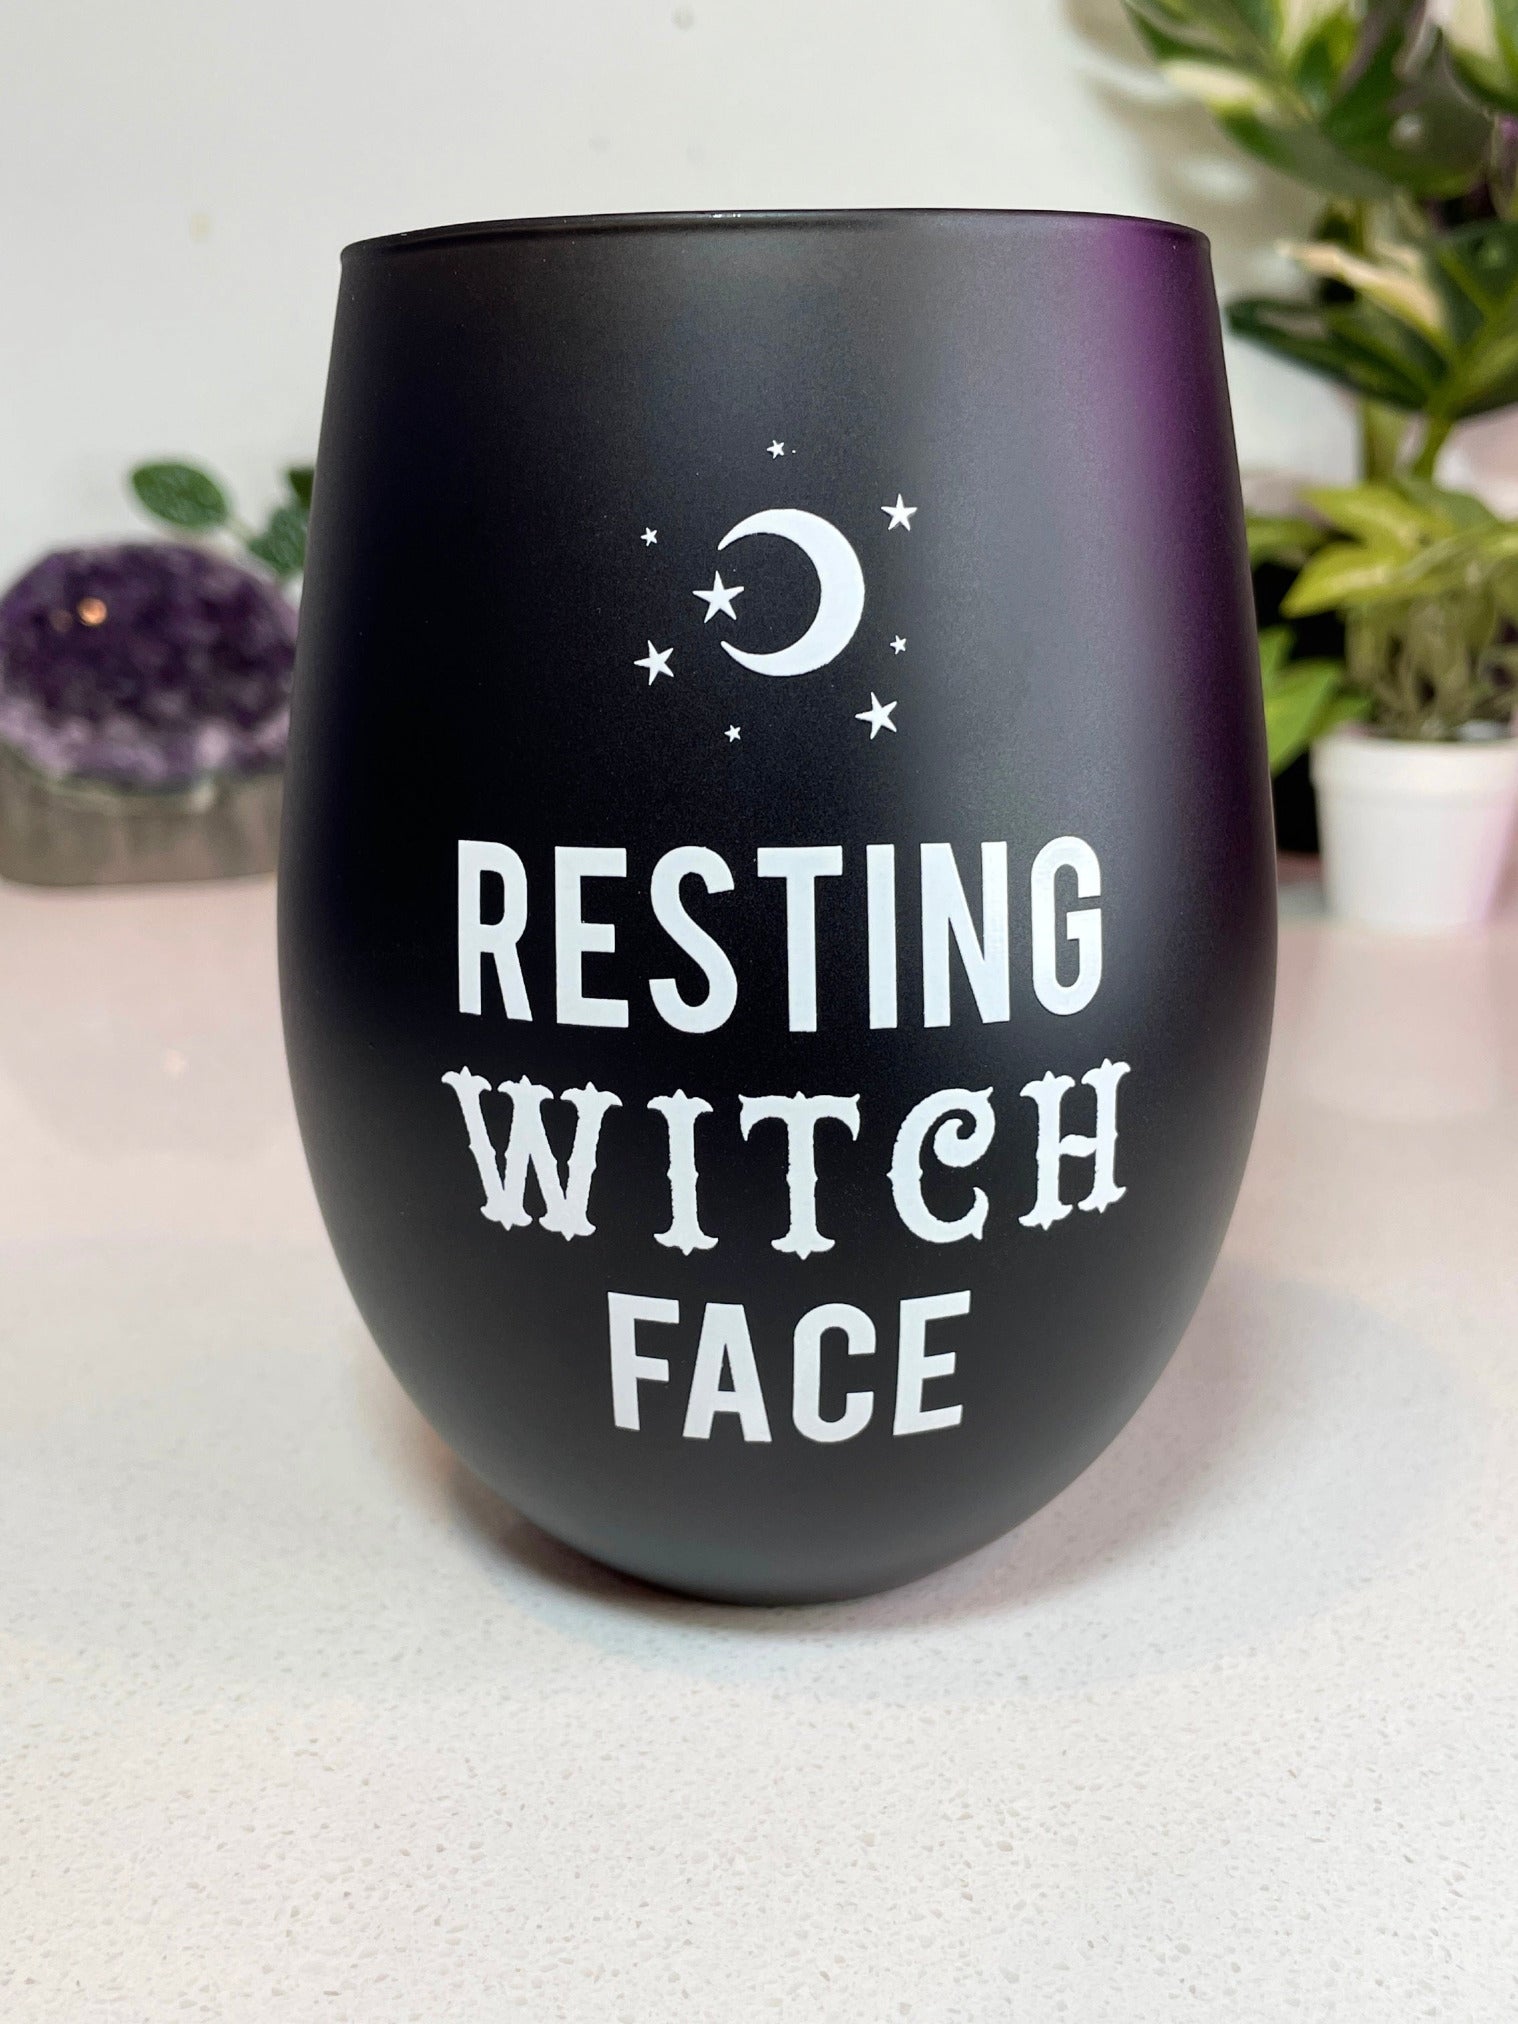 A black stemless wine glass with the words "resting witch face" written on it in white letters. The glass is on a white background.